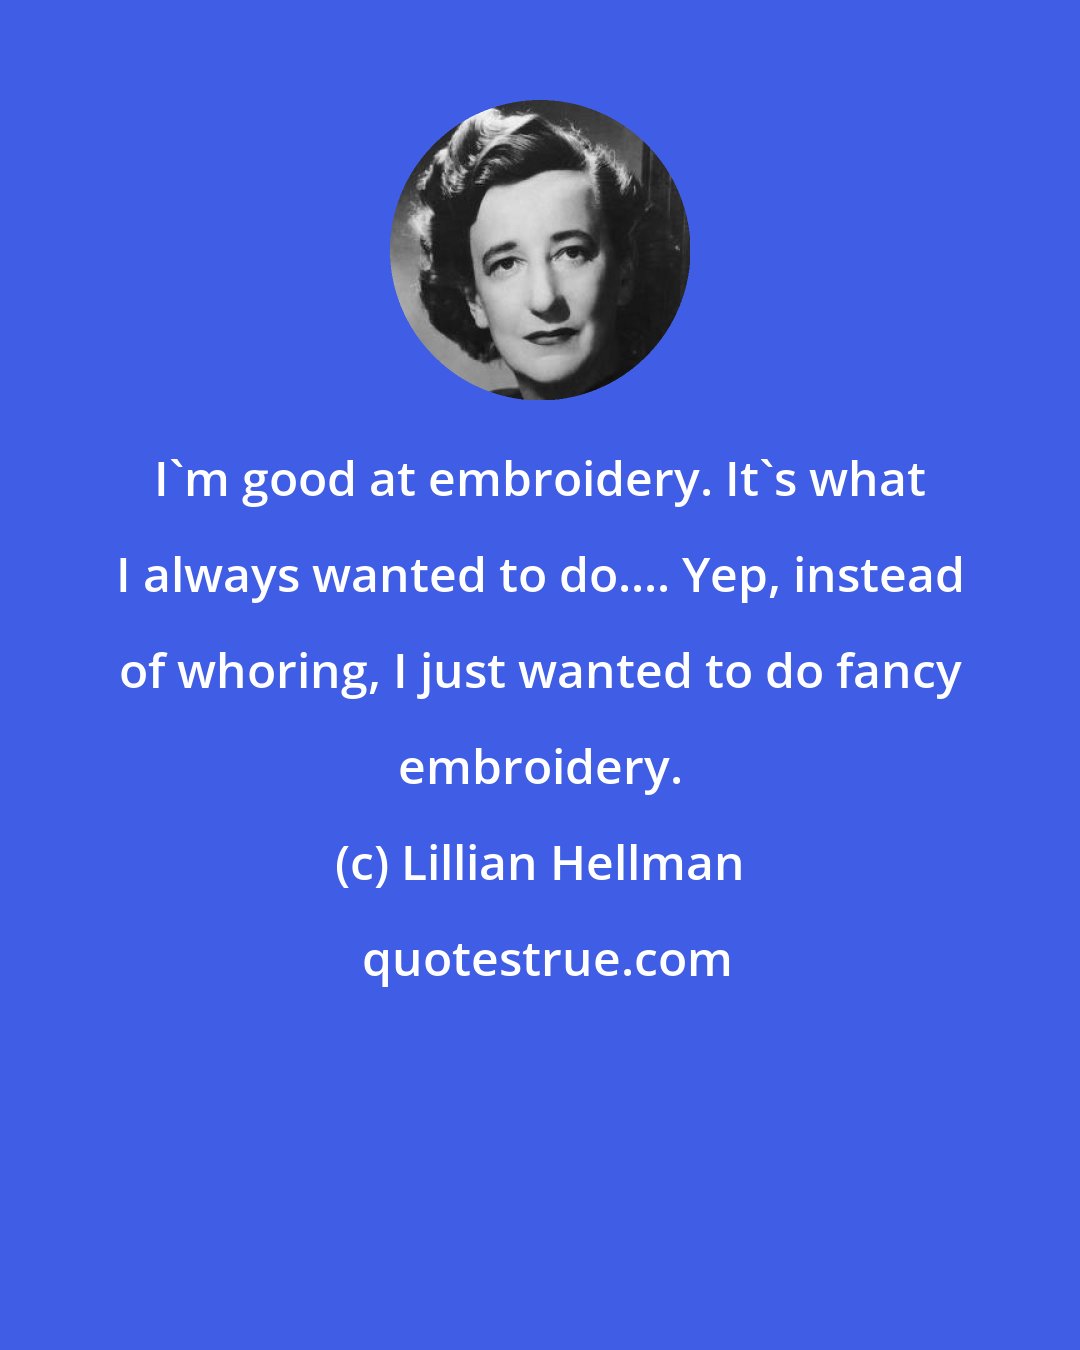 Lillian Hellman: I'm good at embroidery. It's what I always wanted to do.... Yep, instead of whoring, I just wanted to do fancy embroidery.